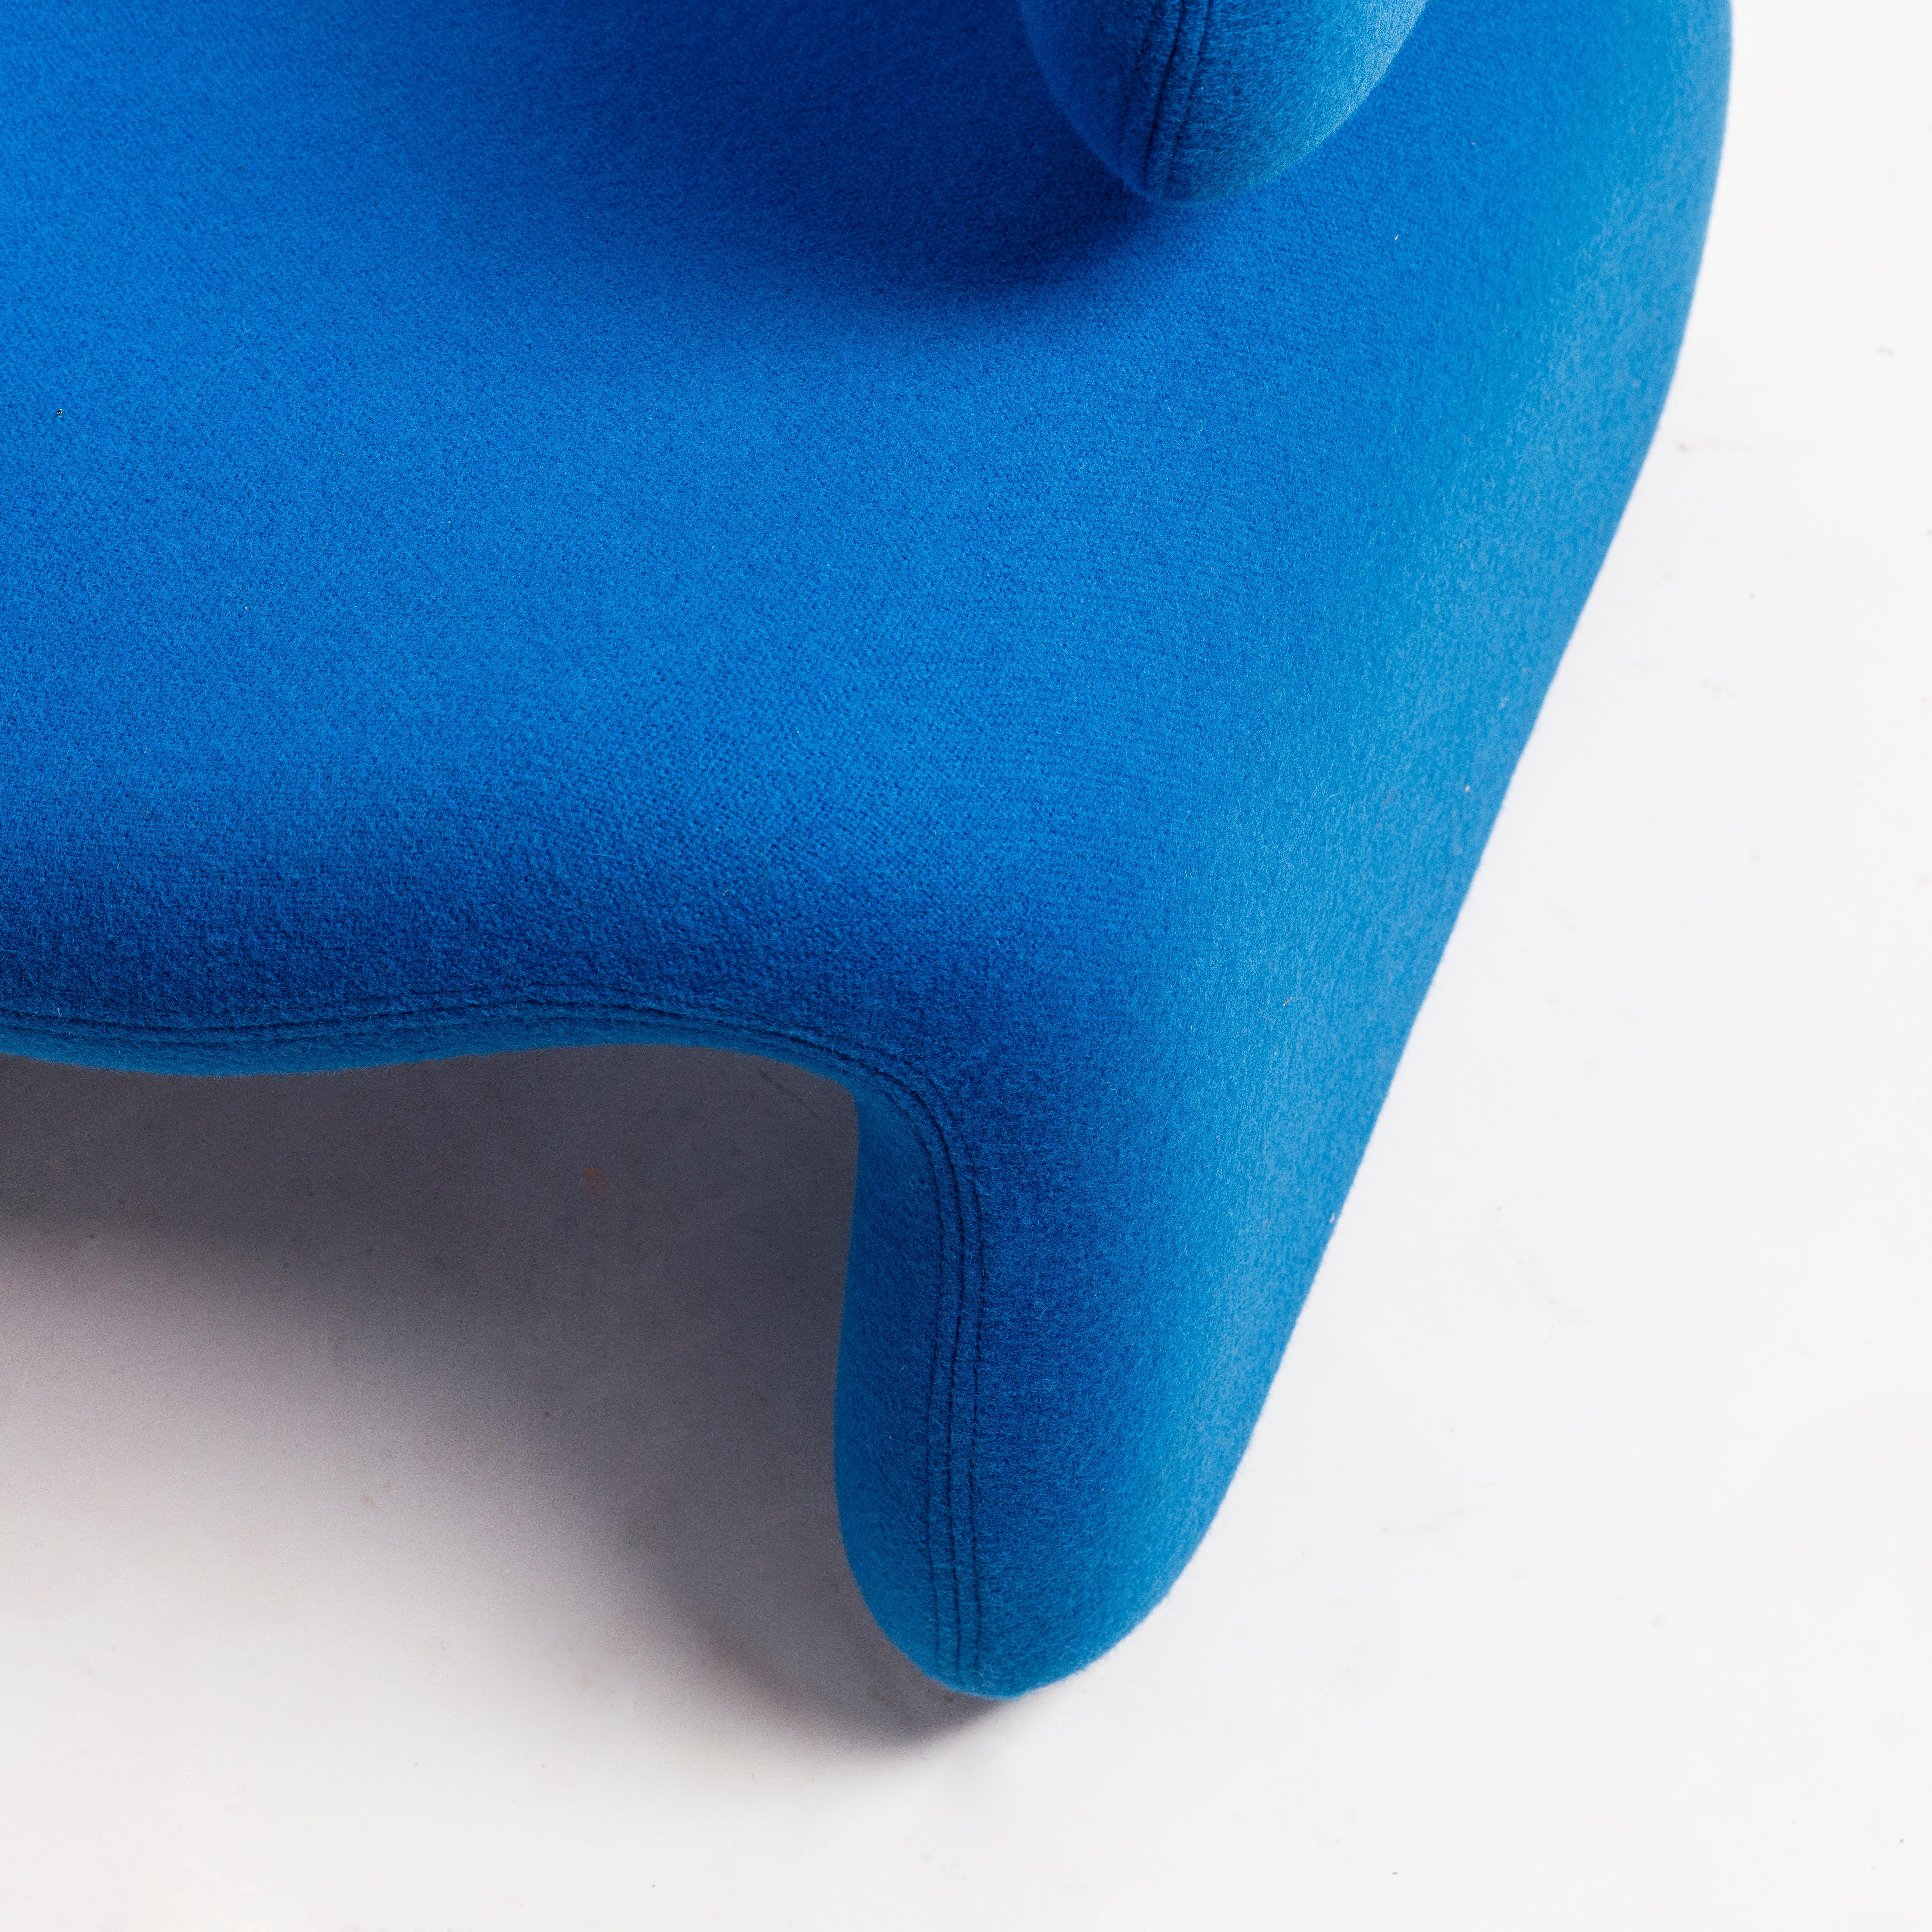 Olivier Mourgue Djinn Blue Armchair for Airborne 1960s New Kvadrat Fabric 5